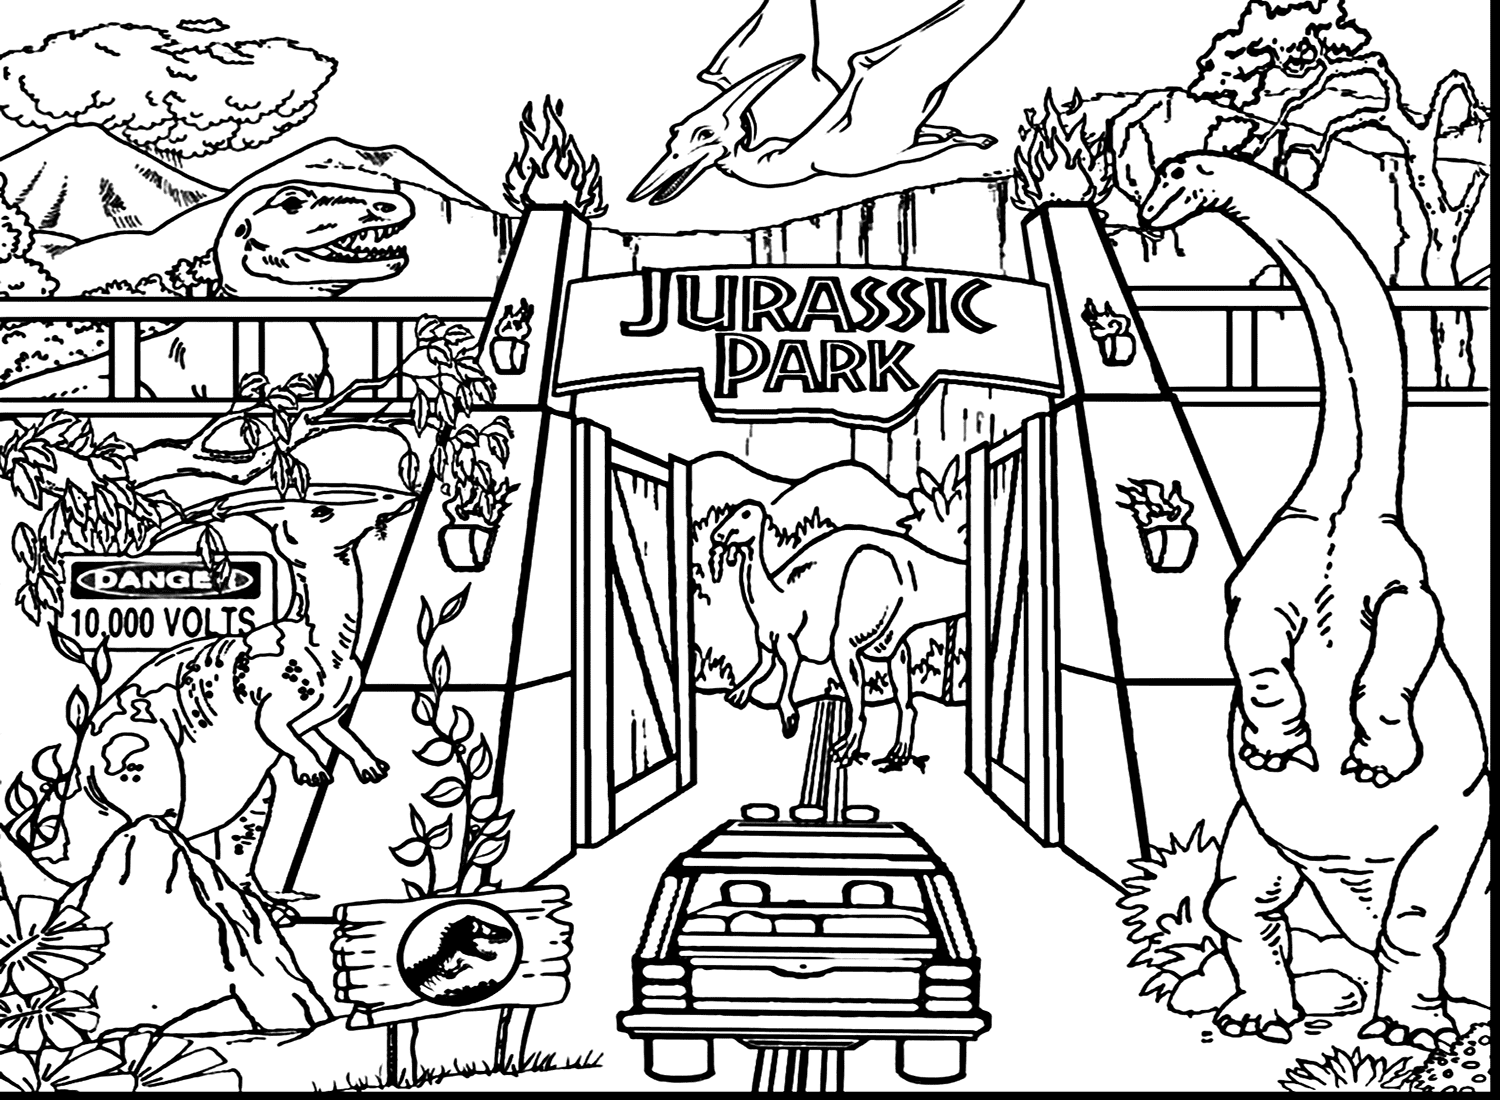 Jurassic World Image To Color Coloring Page - Free Printable Coloring Pages